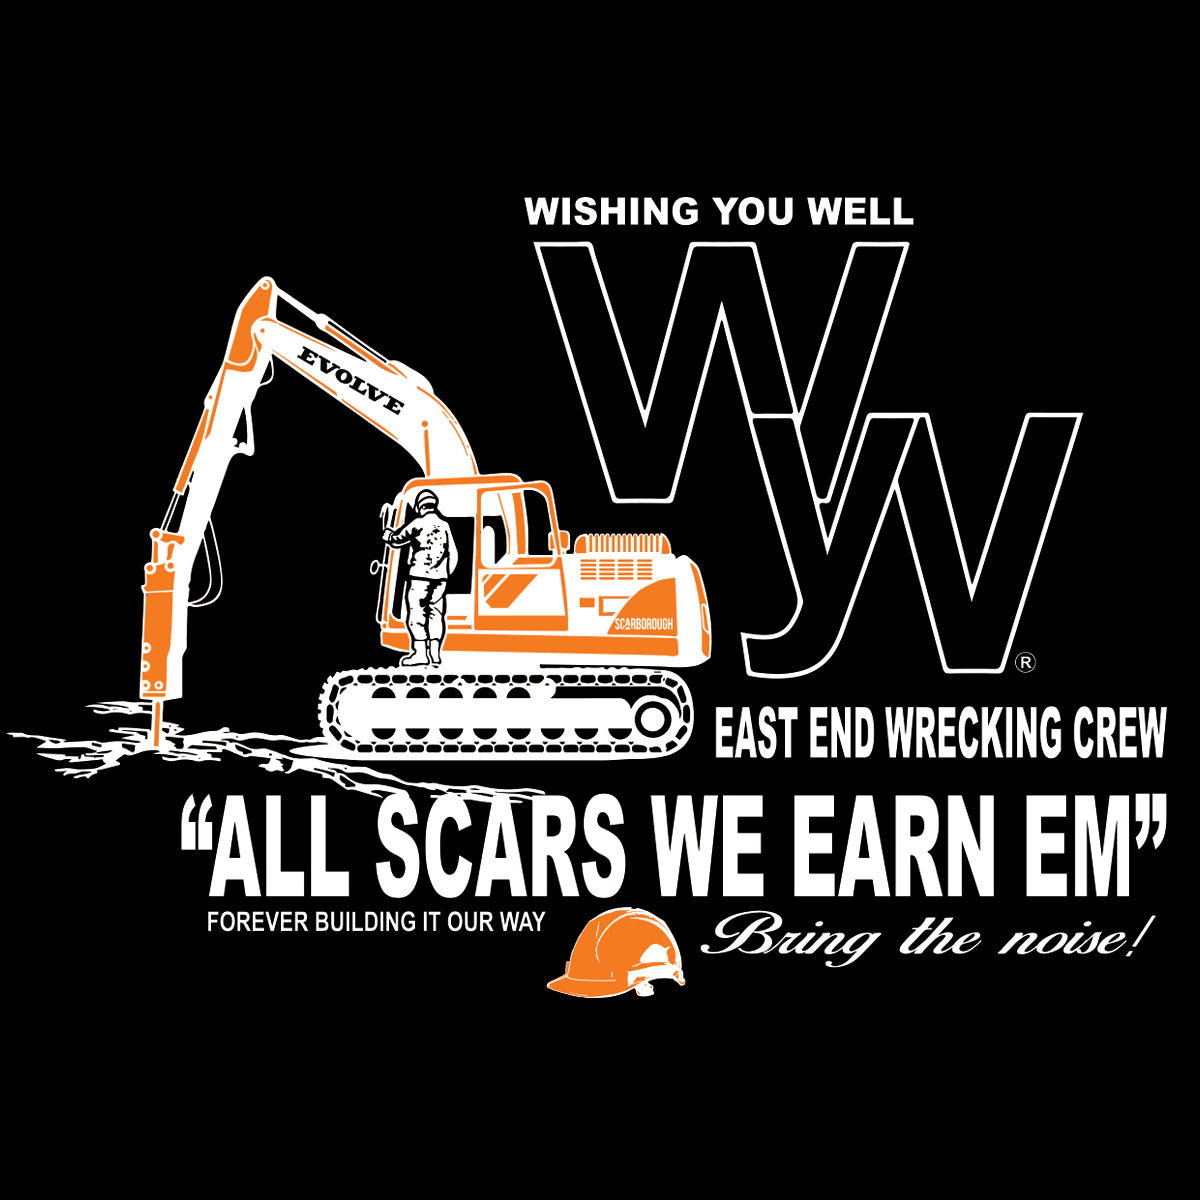 SCARBOROUGH EAST END WRECKING CREW LONG SLEEVE (BLACK)